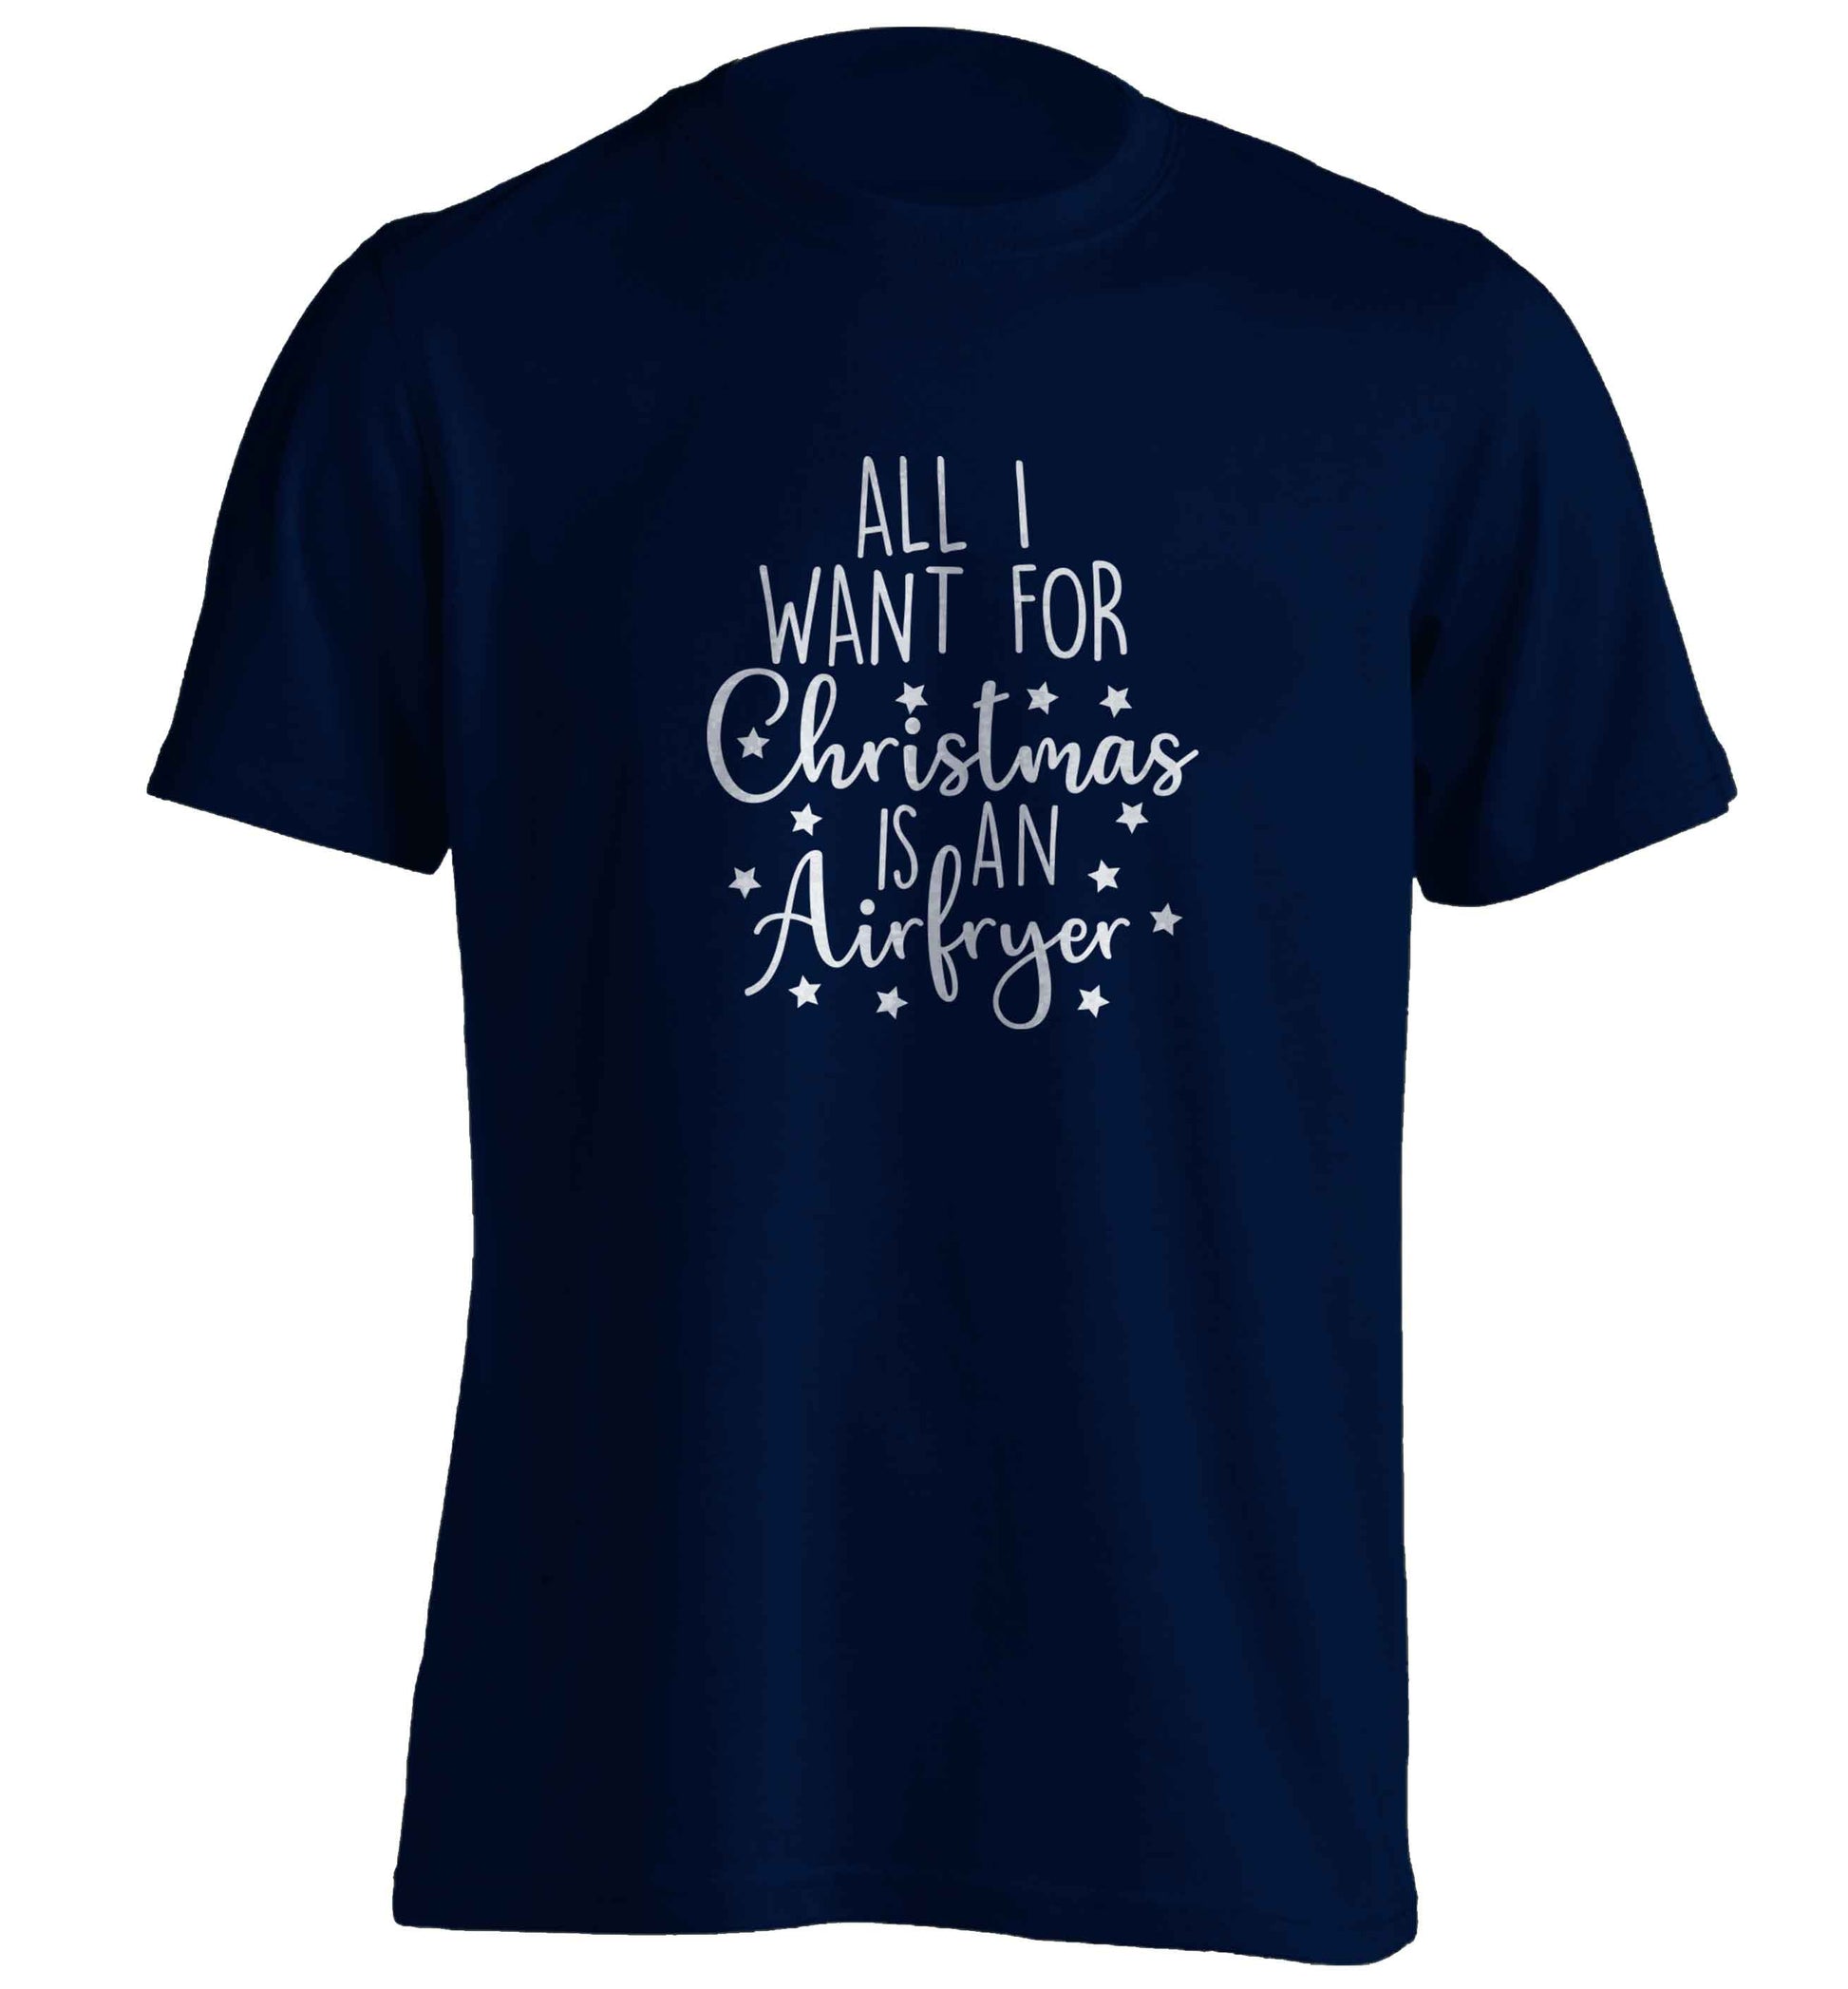 All I want for Christmas is an airfryeradults unisex navy Tshirt 2XL